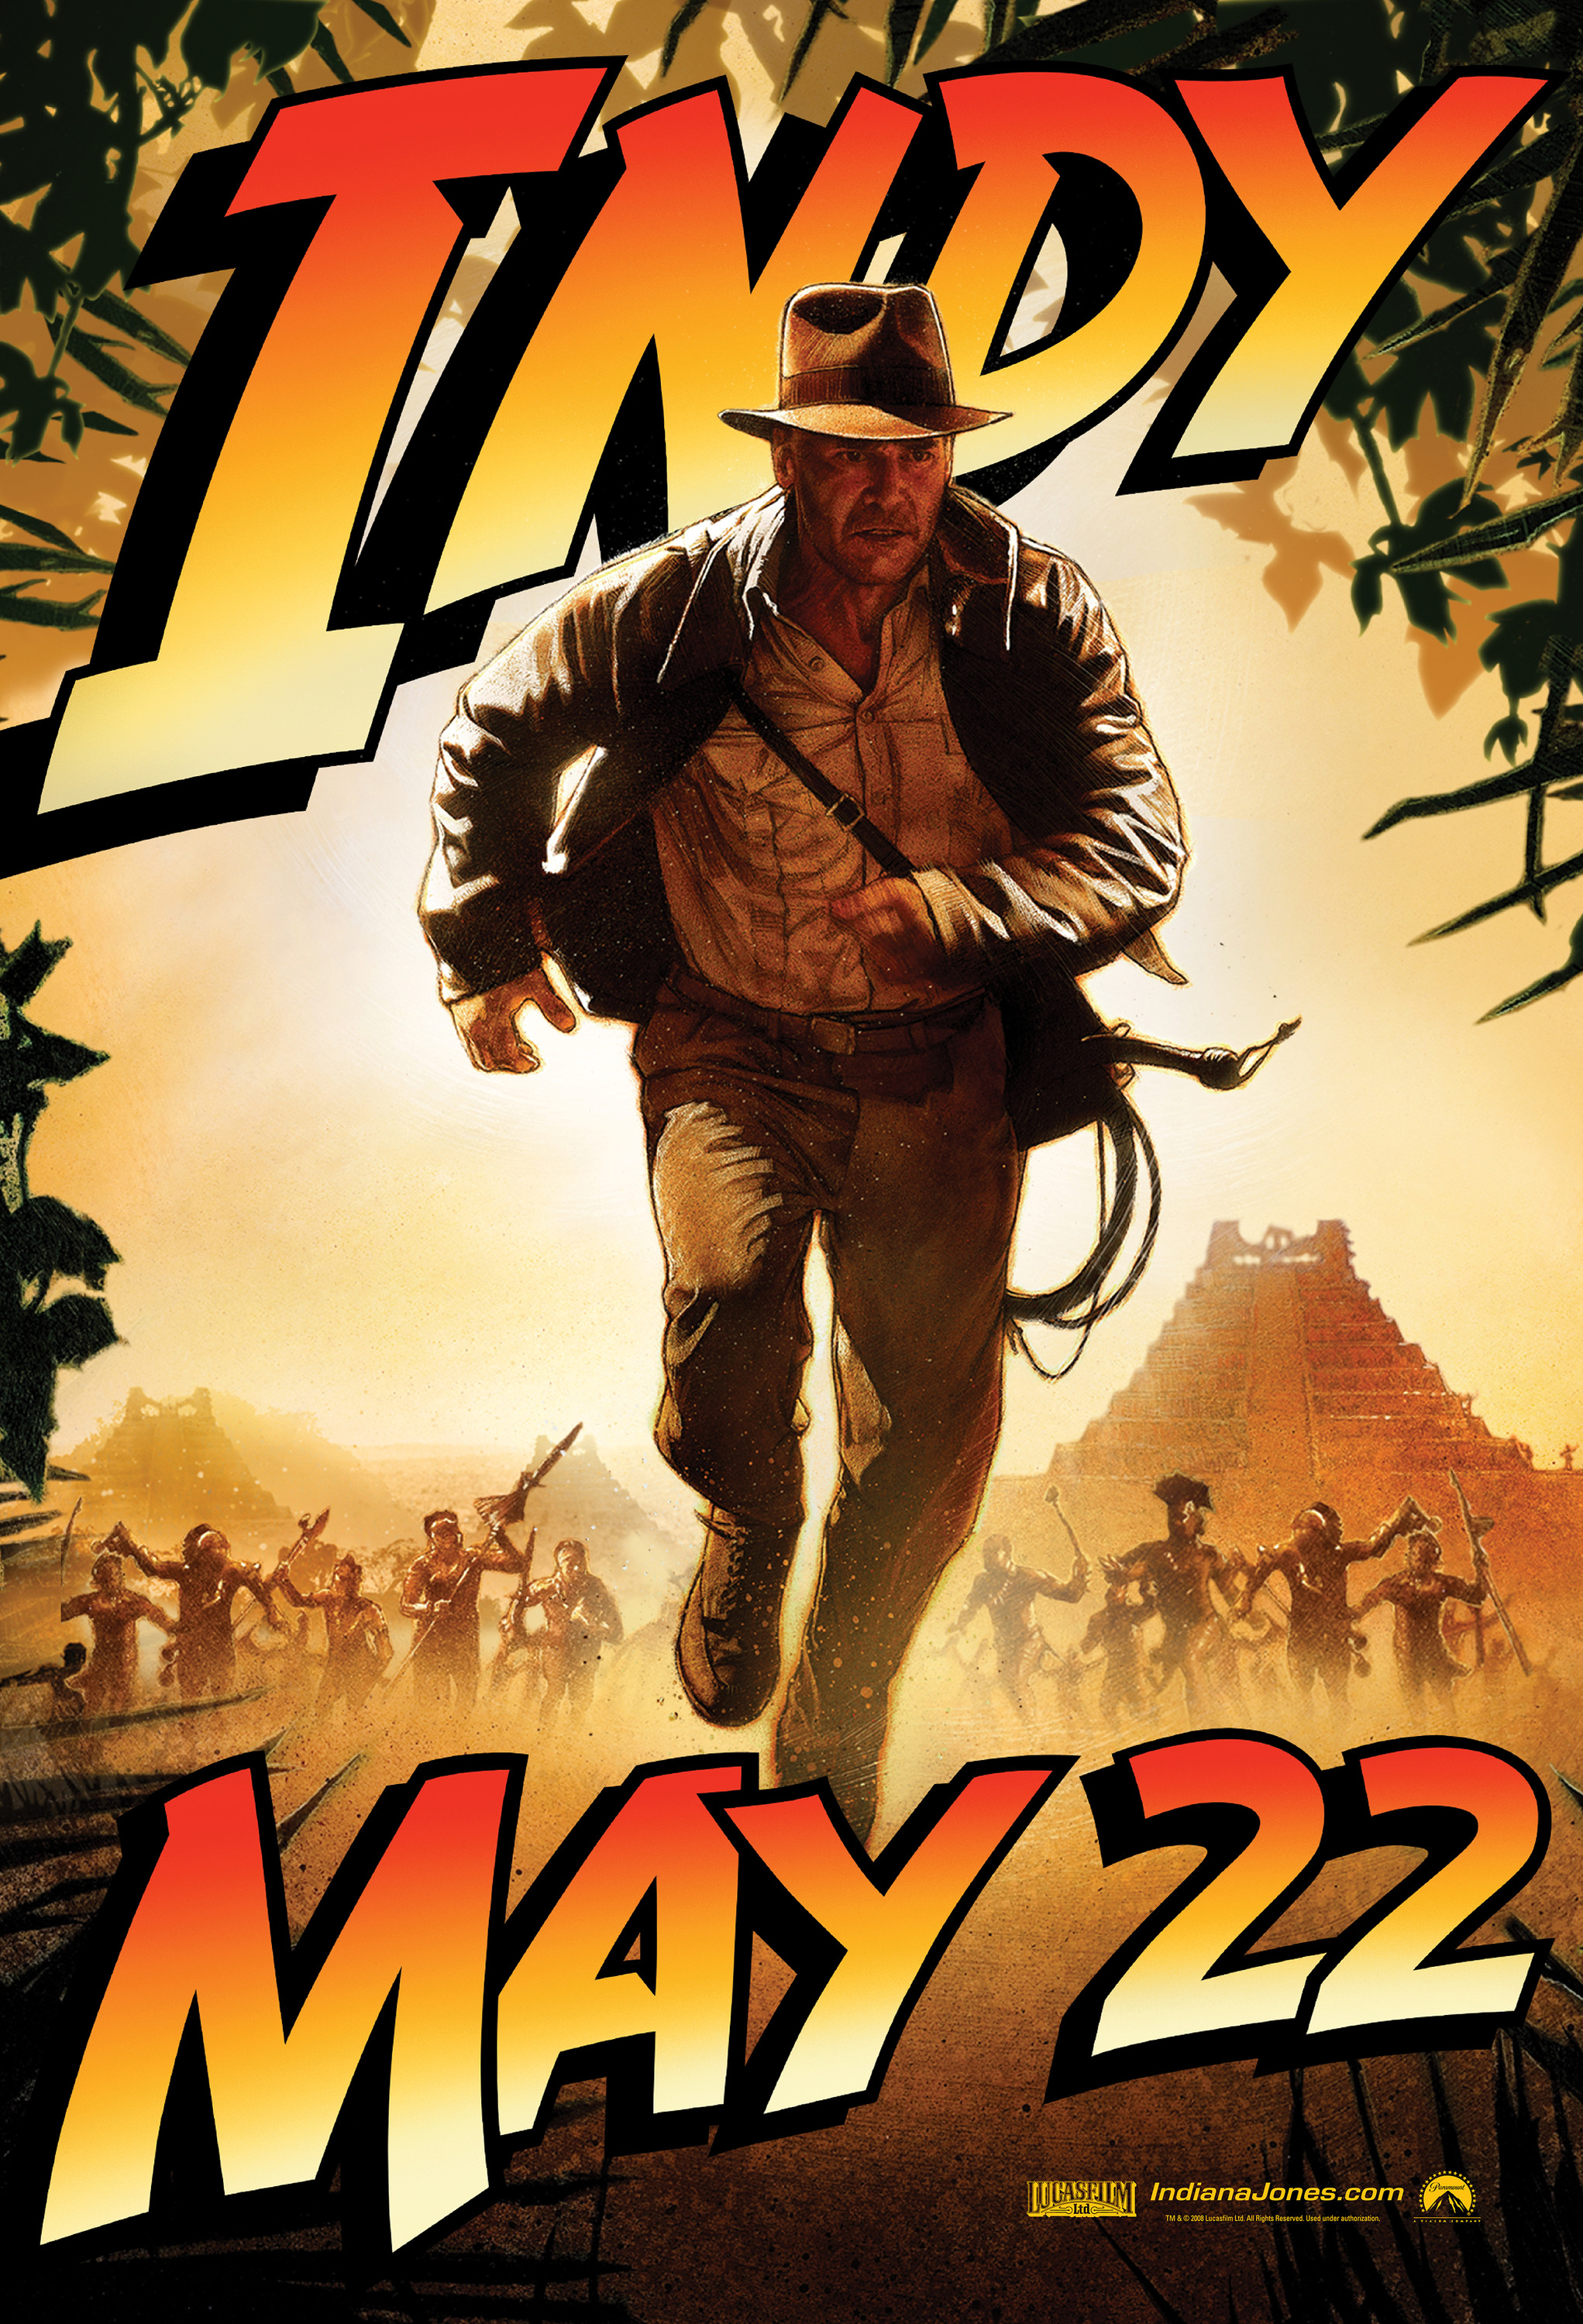 Mega Sized Movie Poster Image for Indiana Jones and the Kingdom of the Crystal Skull (#5 of 11)